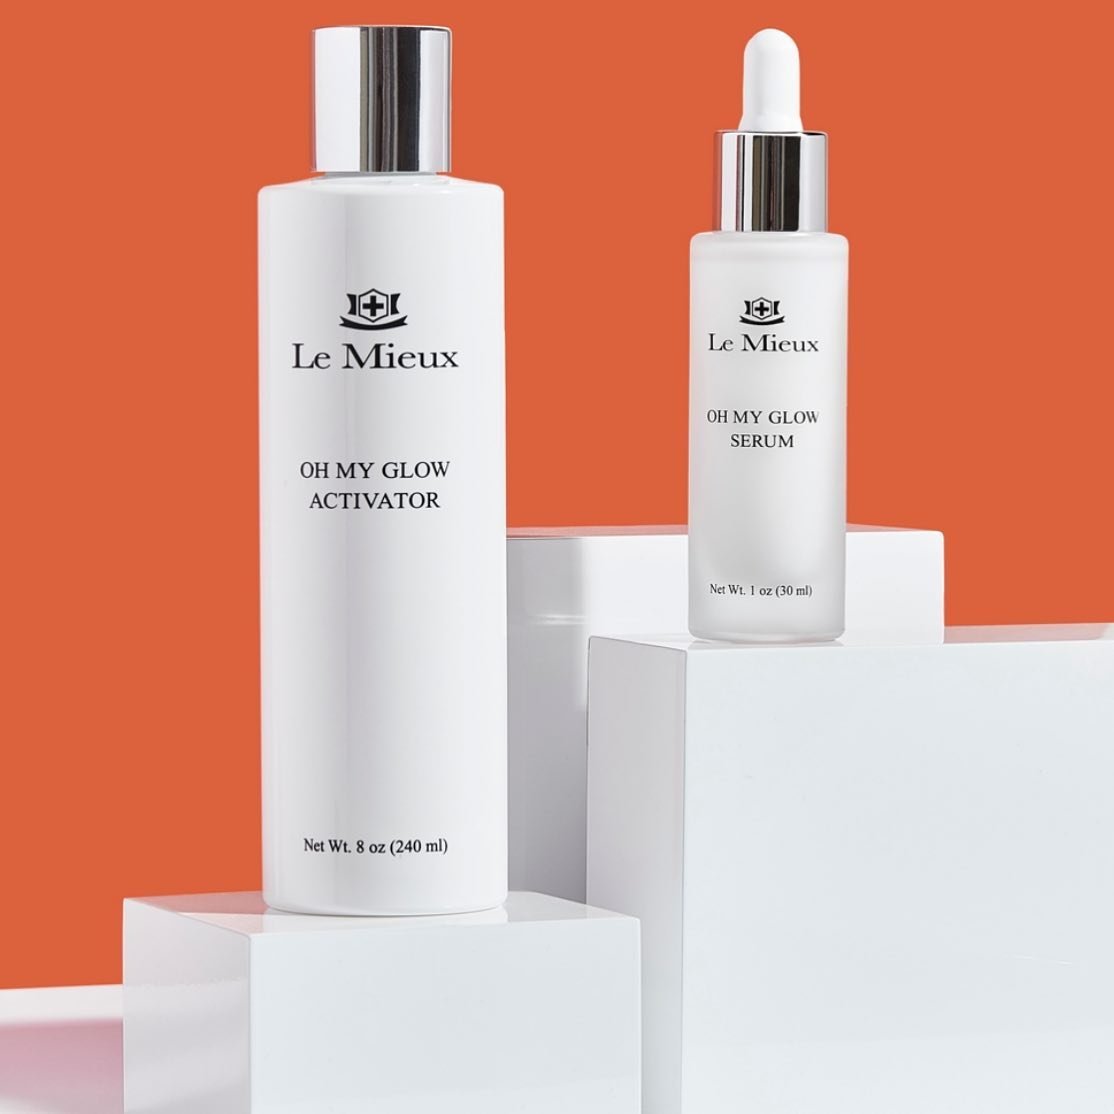 Oh My Glow Serum - Le Mieux Skincare